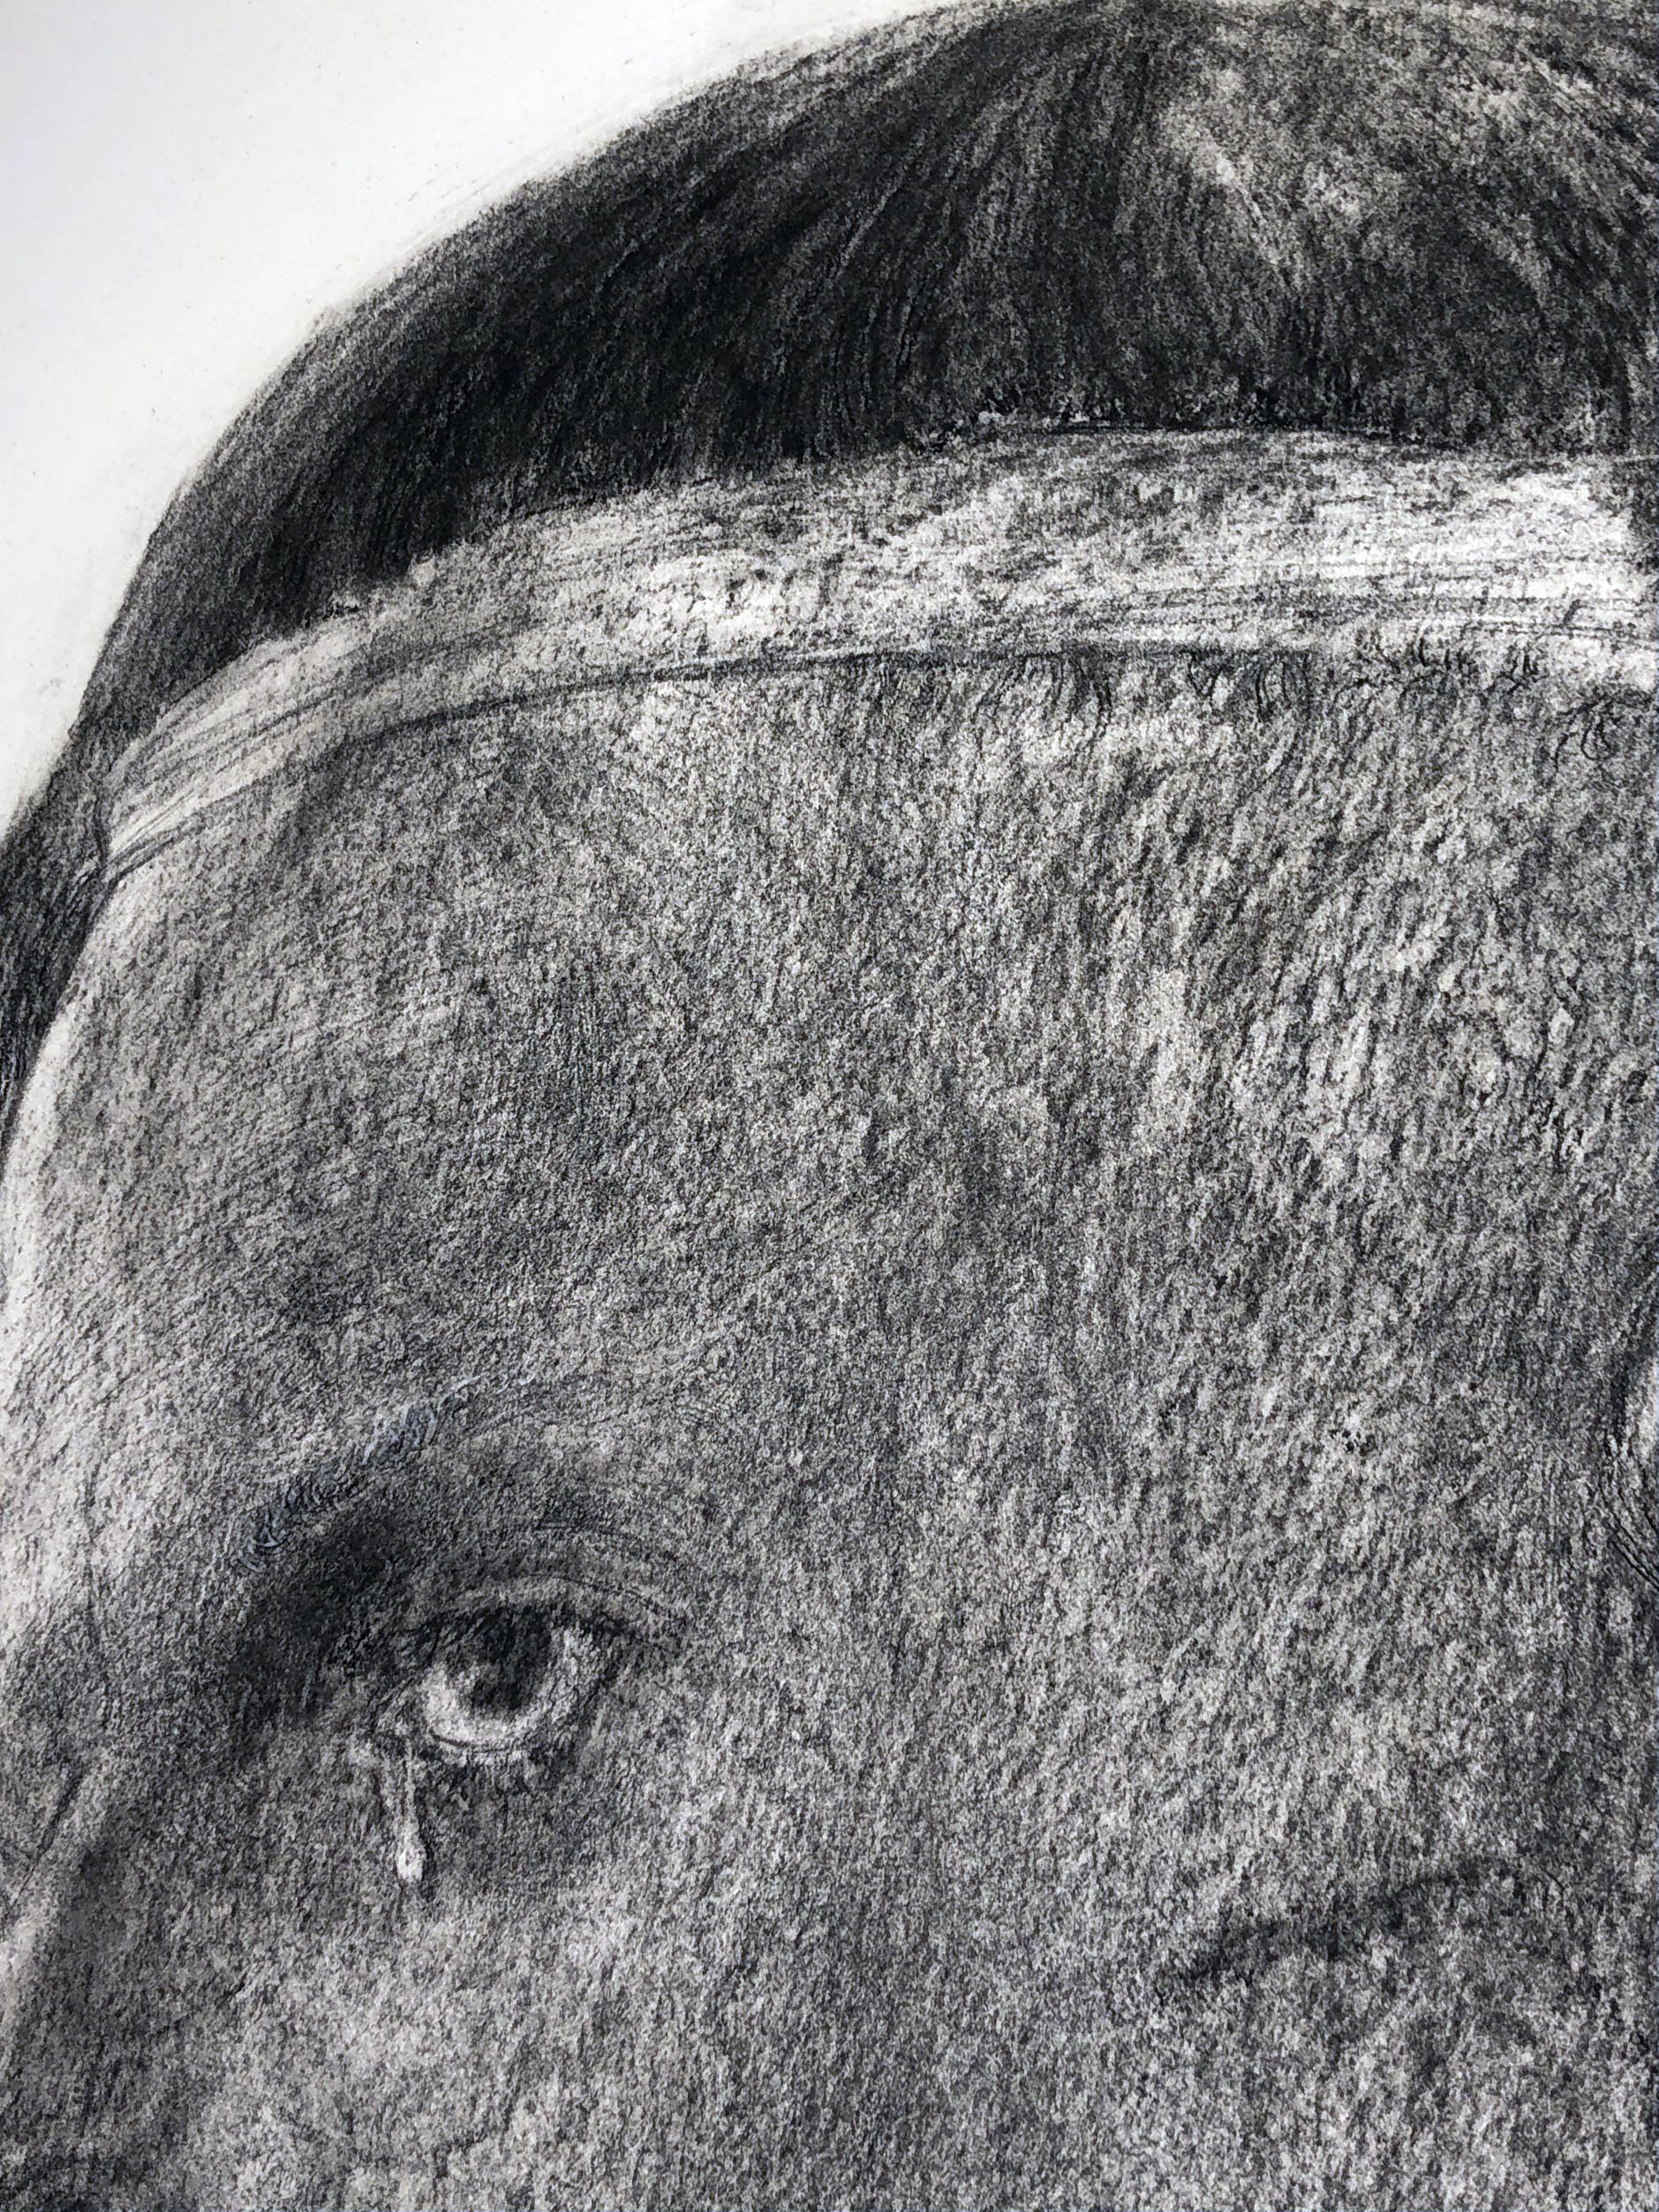 Human facial expressions help convey our stories from one person to another.  However, David Becker presents this charcoal drawing with a flair for confusion.  Throughout his career, Becker's work has been called allegorical, apocalyptic,